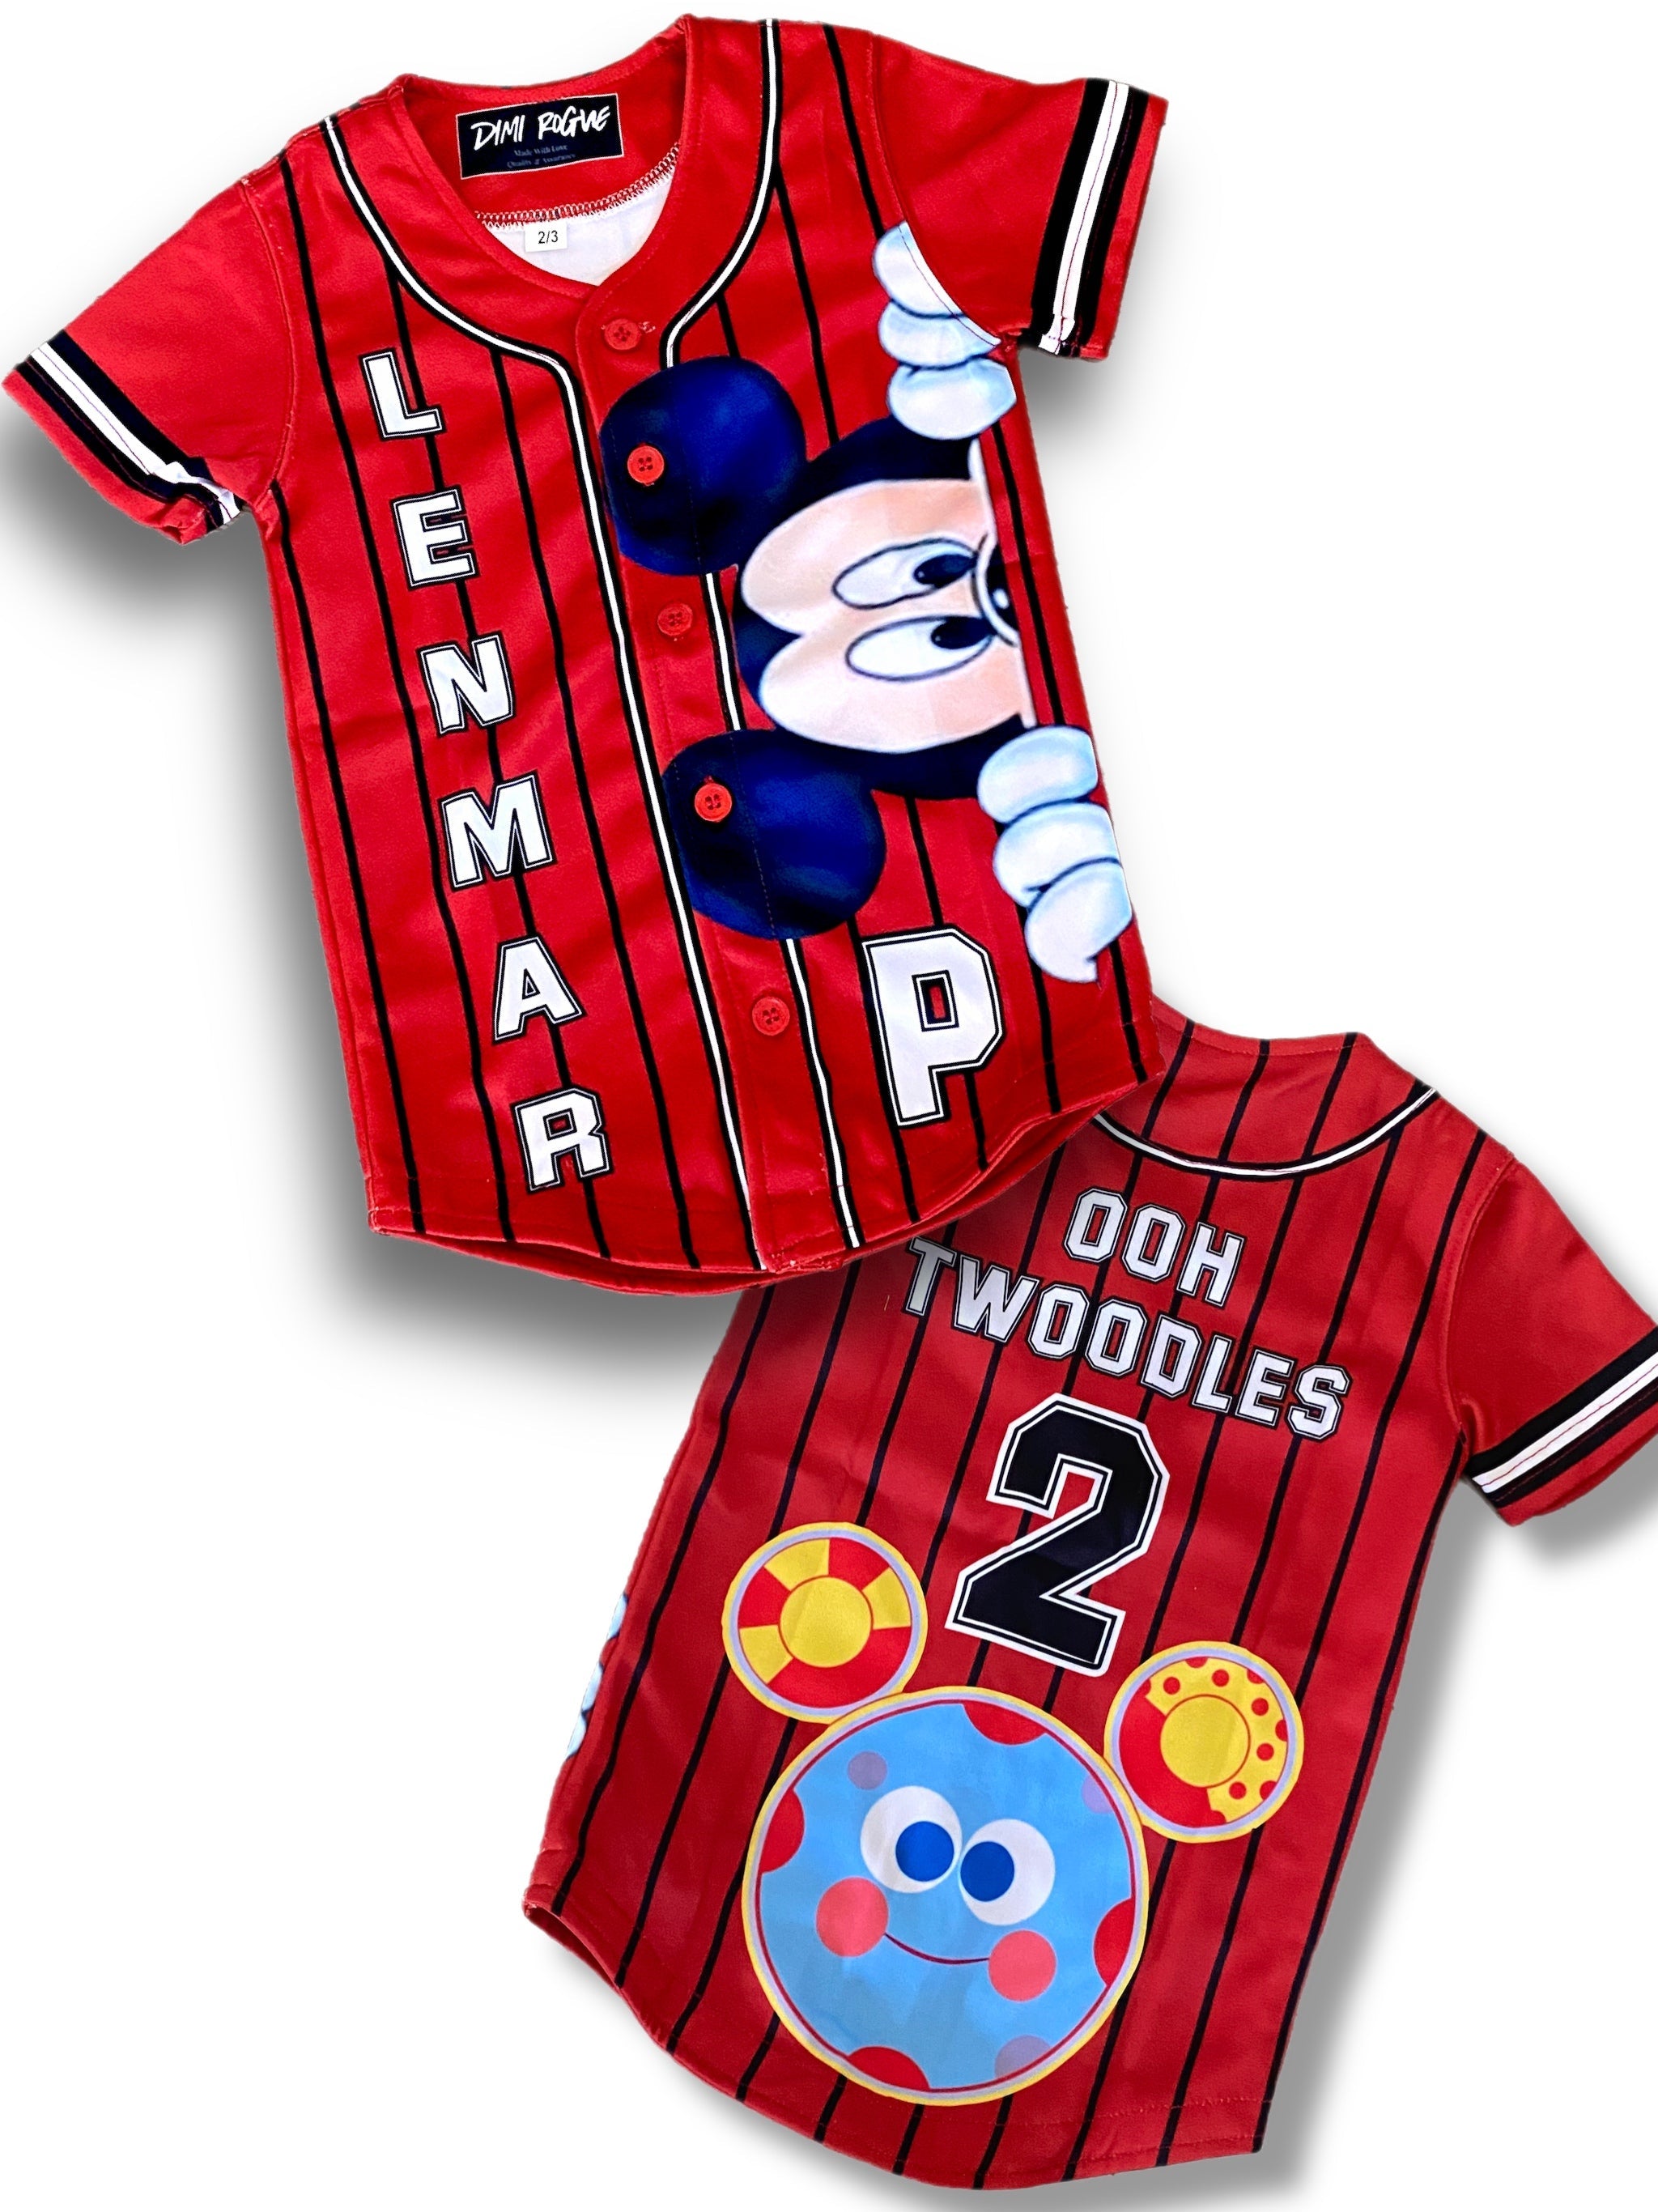 Women's red Mickey Mouse Jersey